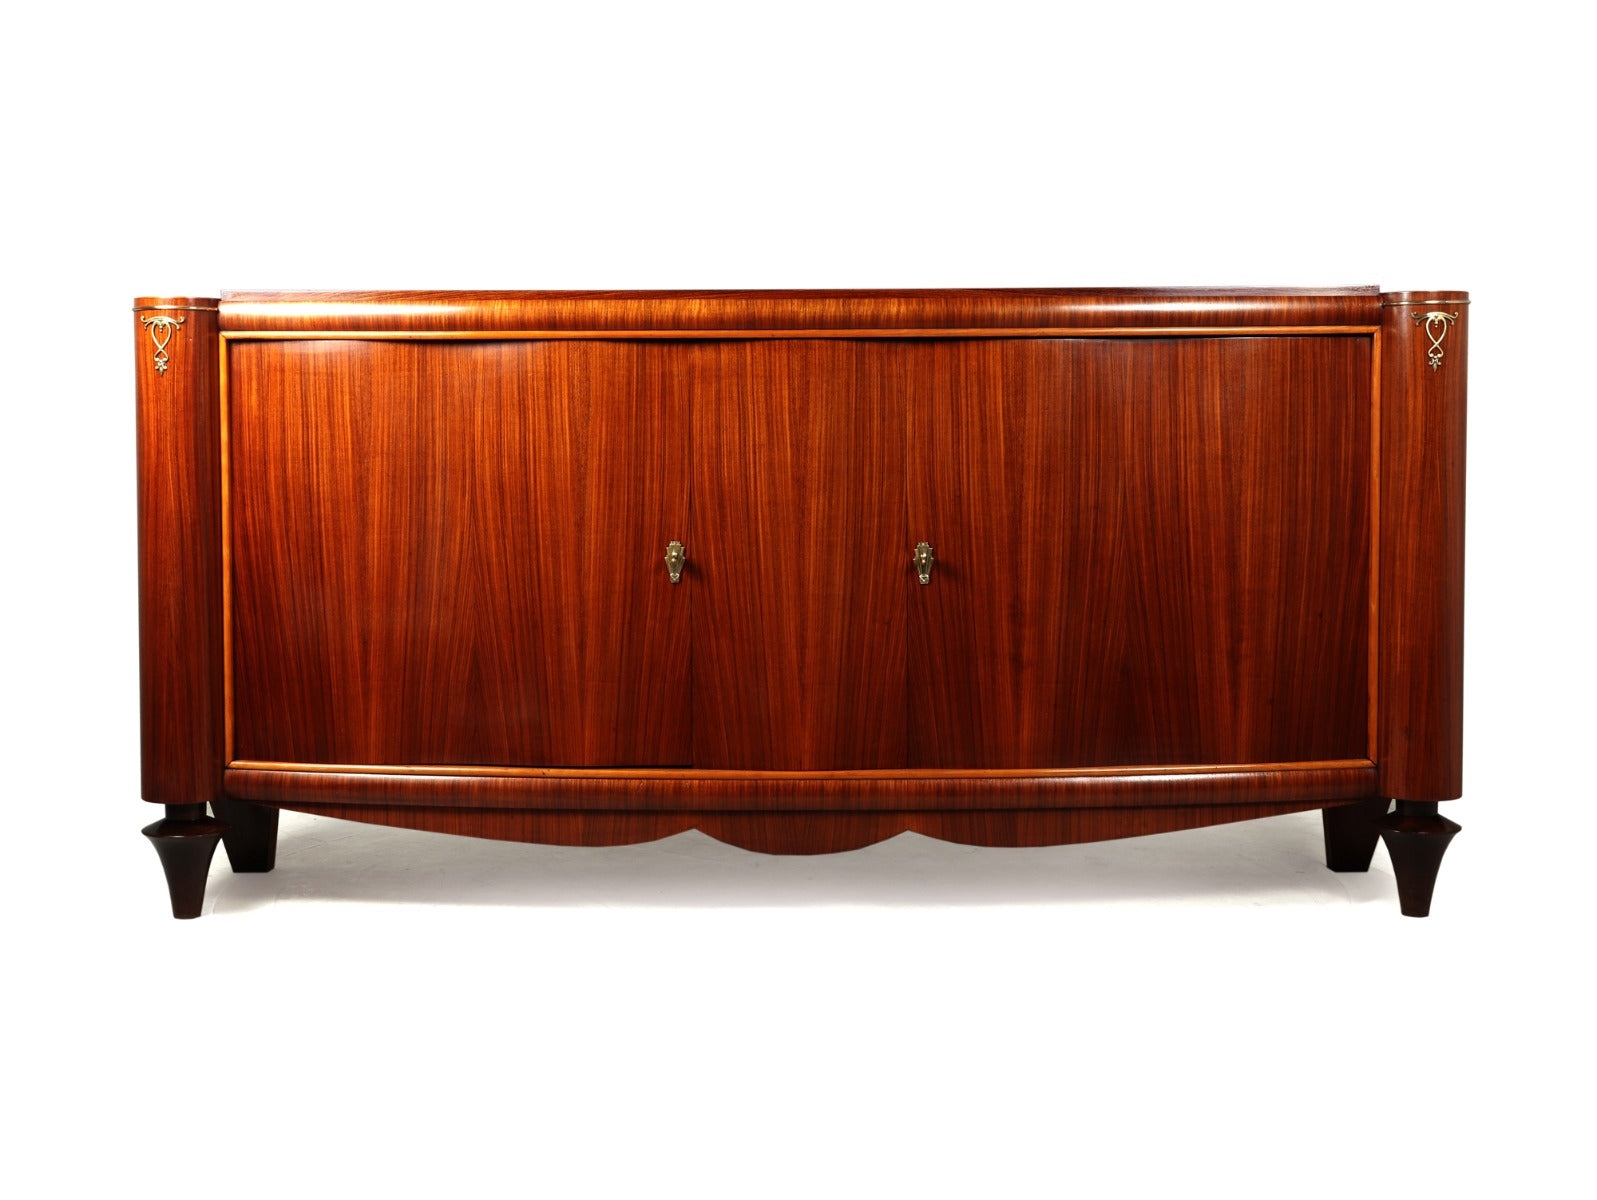 French Art Deco Sideboard in Palisander – The Furniture Rooms